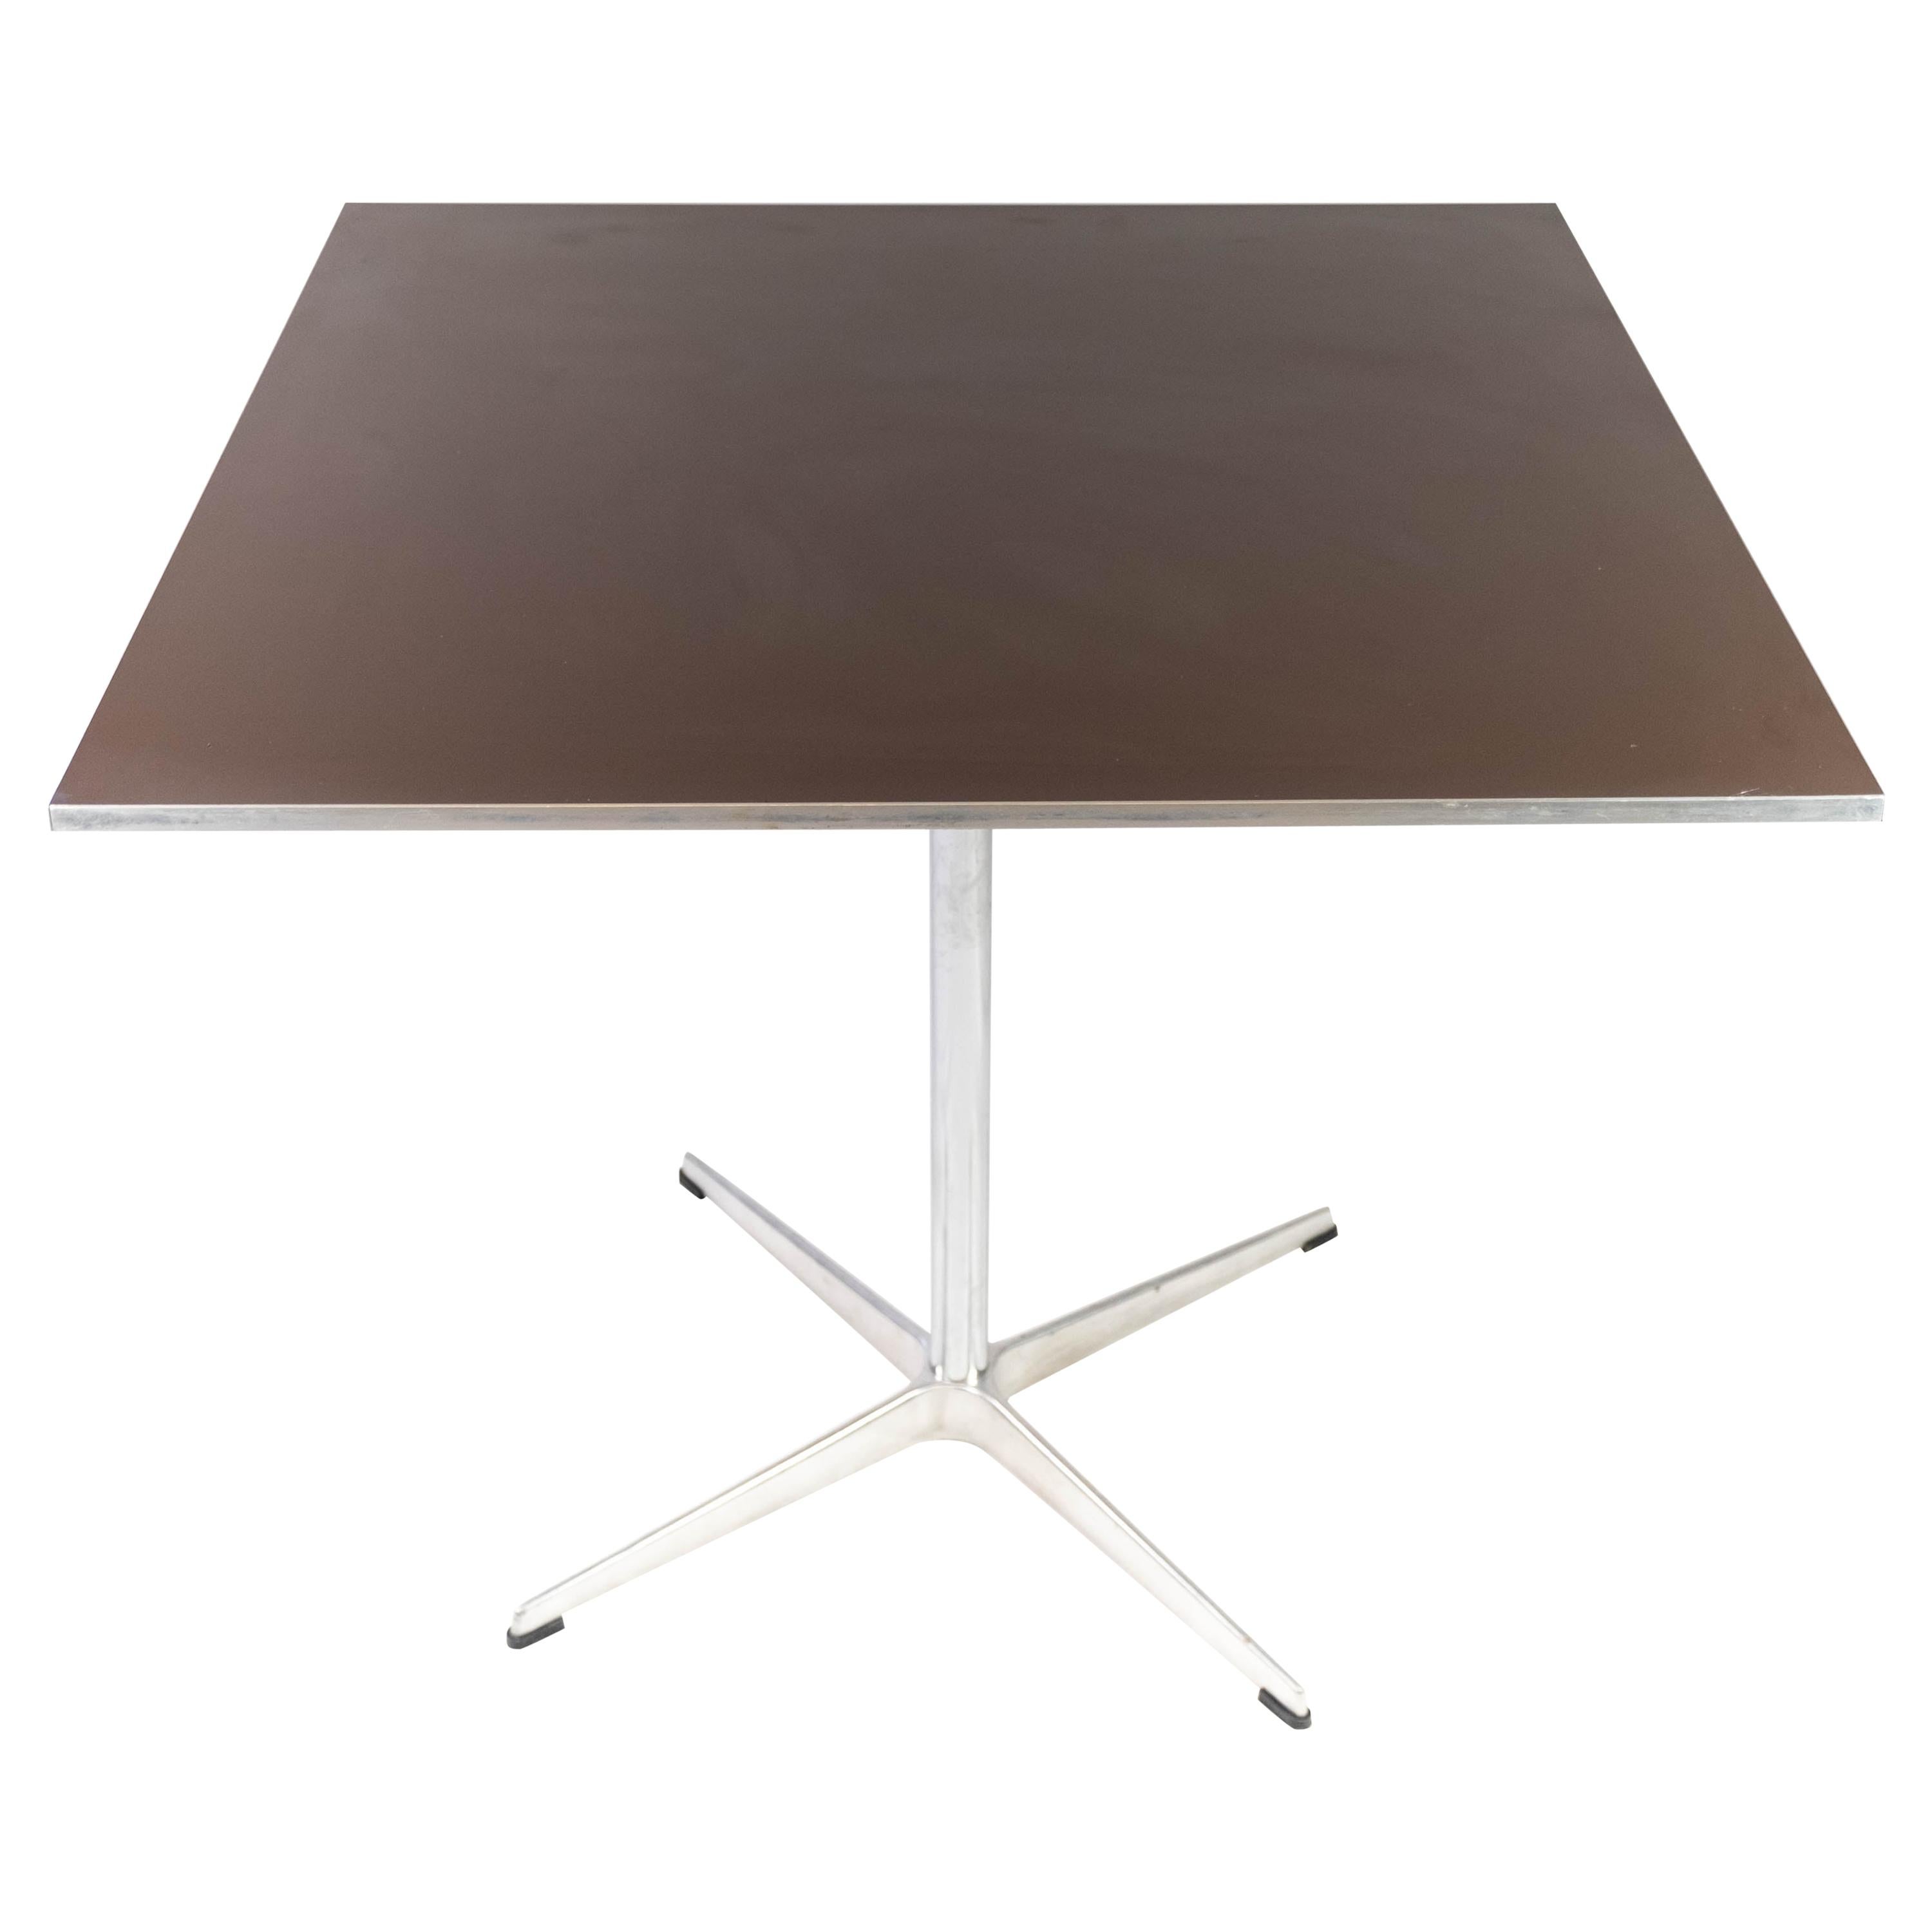 Dining Table of Metal and Laminate Designed by Arne Jacobsen